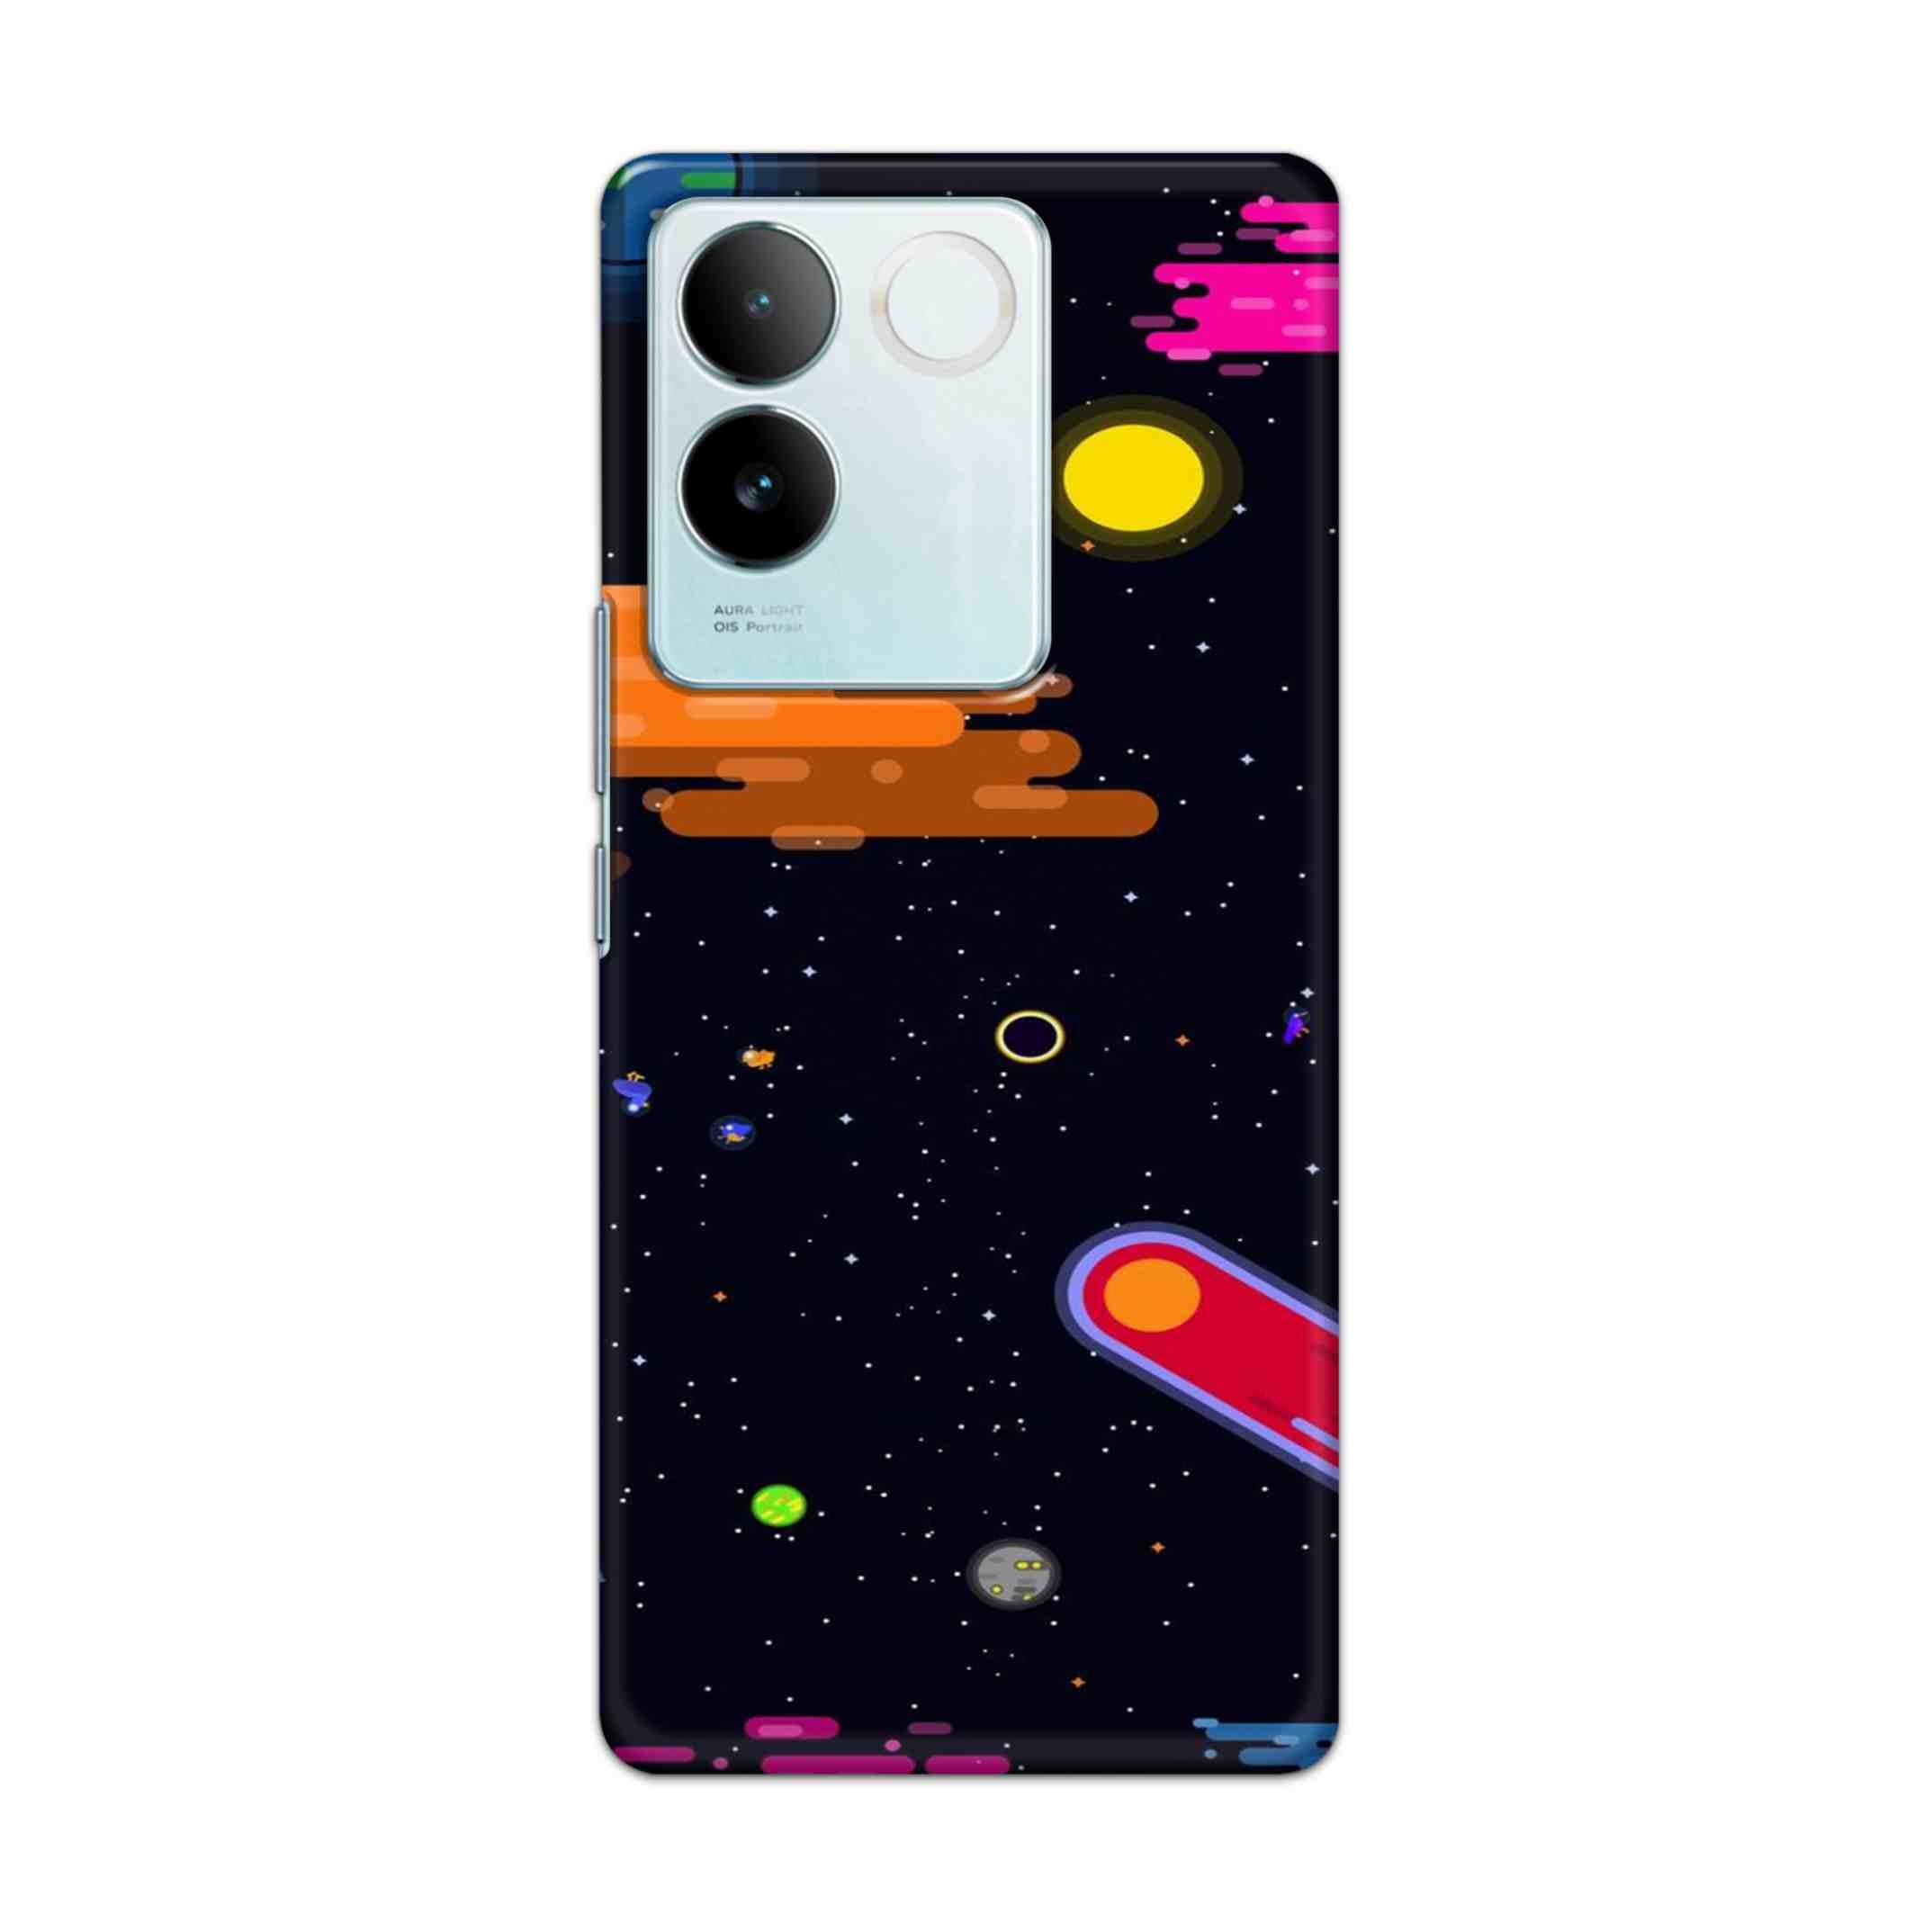 Buy Art Space Hard Back Mobile Phone Case/Cover For iQOO Z7 Pro (5G) Online